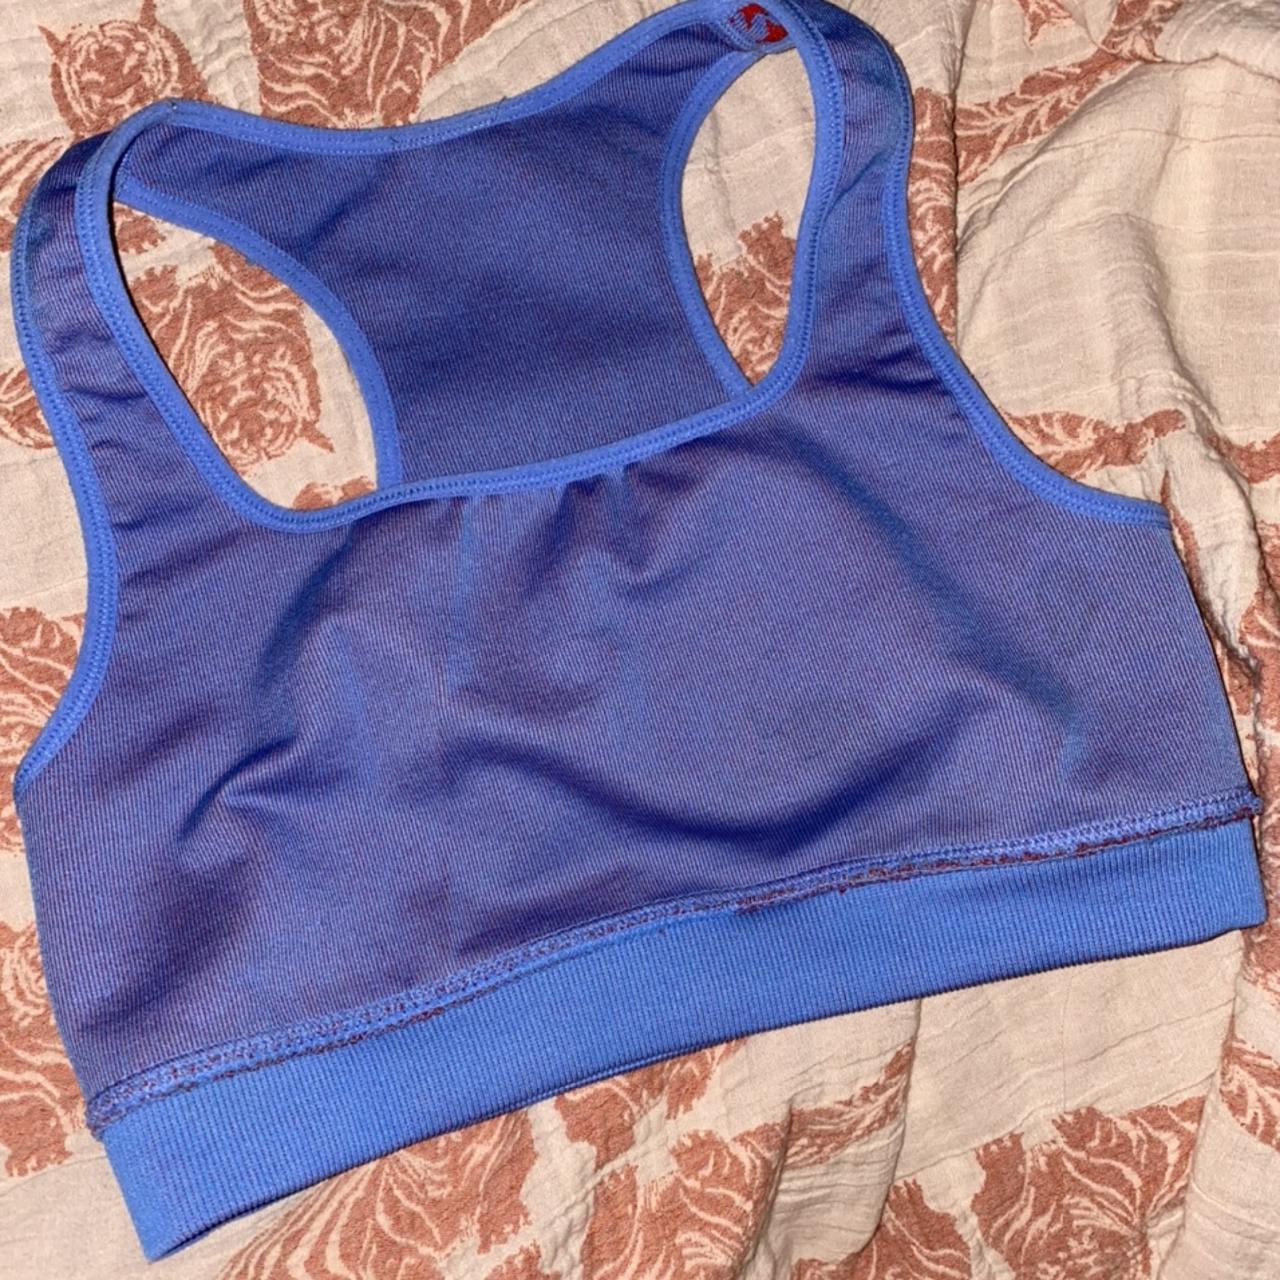 Product Image 3 - ✨Fabletics star sports bra✨

*seamless 

💕Shipping:$5.45💕